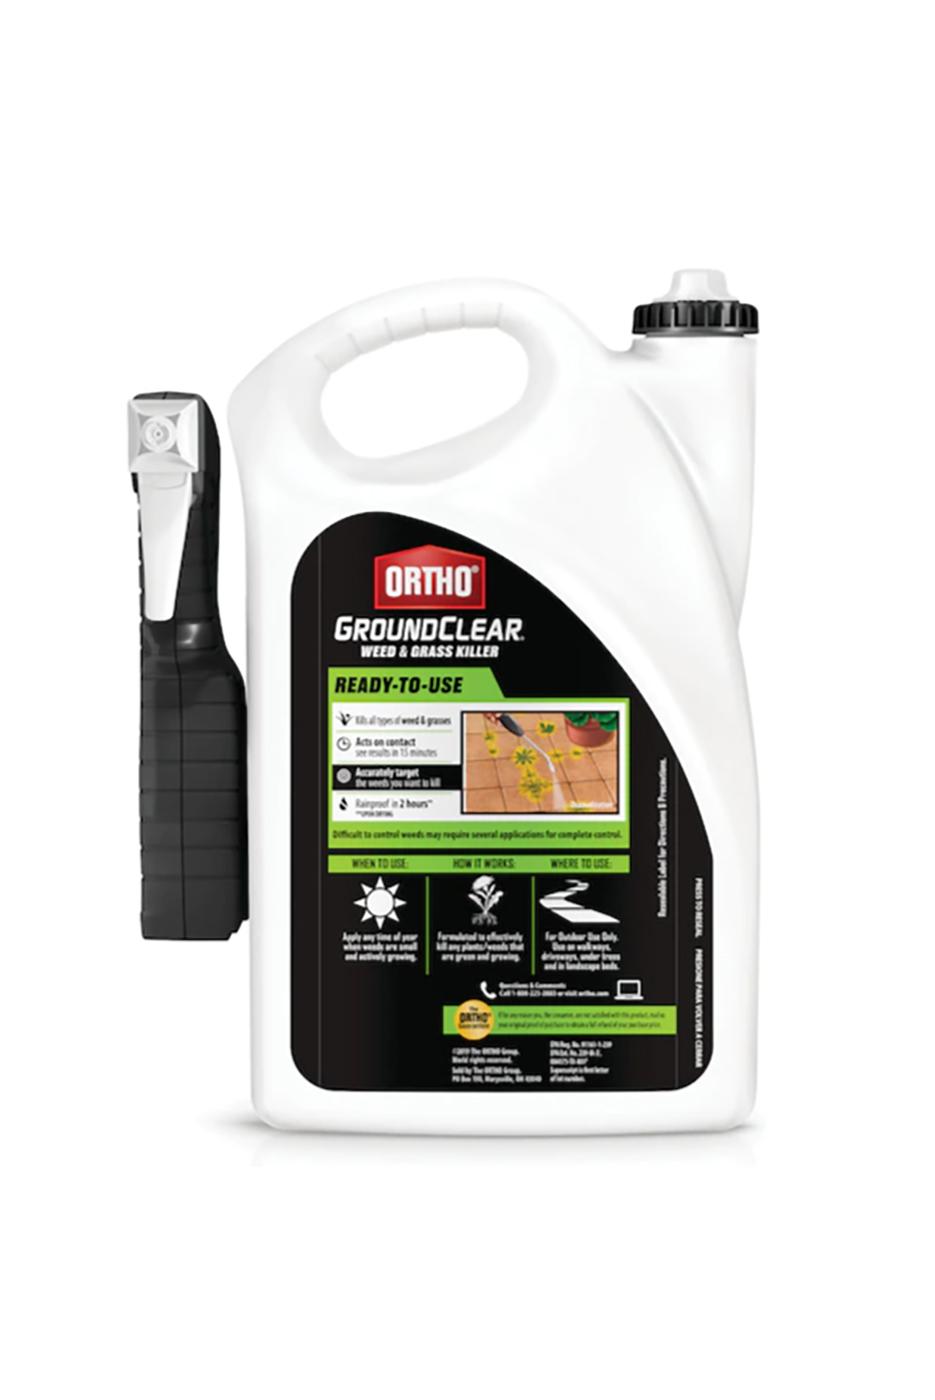 Ortho GroundClear Weed & Grass Killer; image 2 of 2